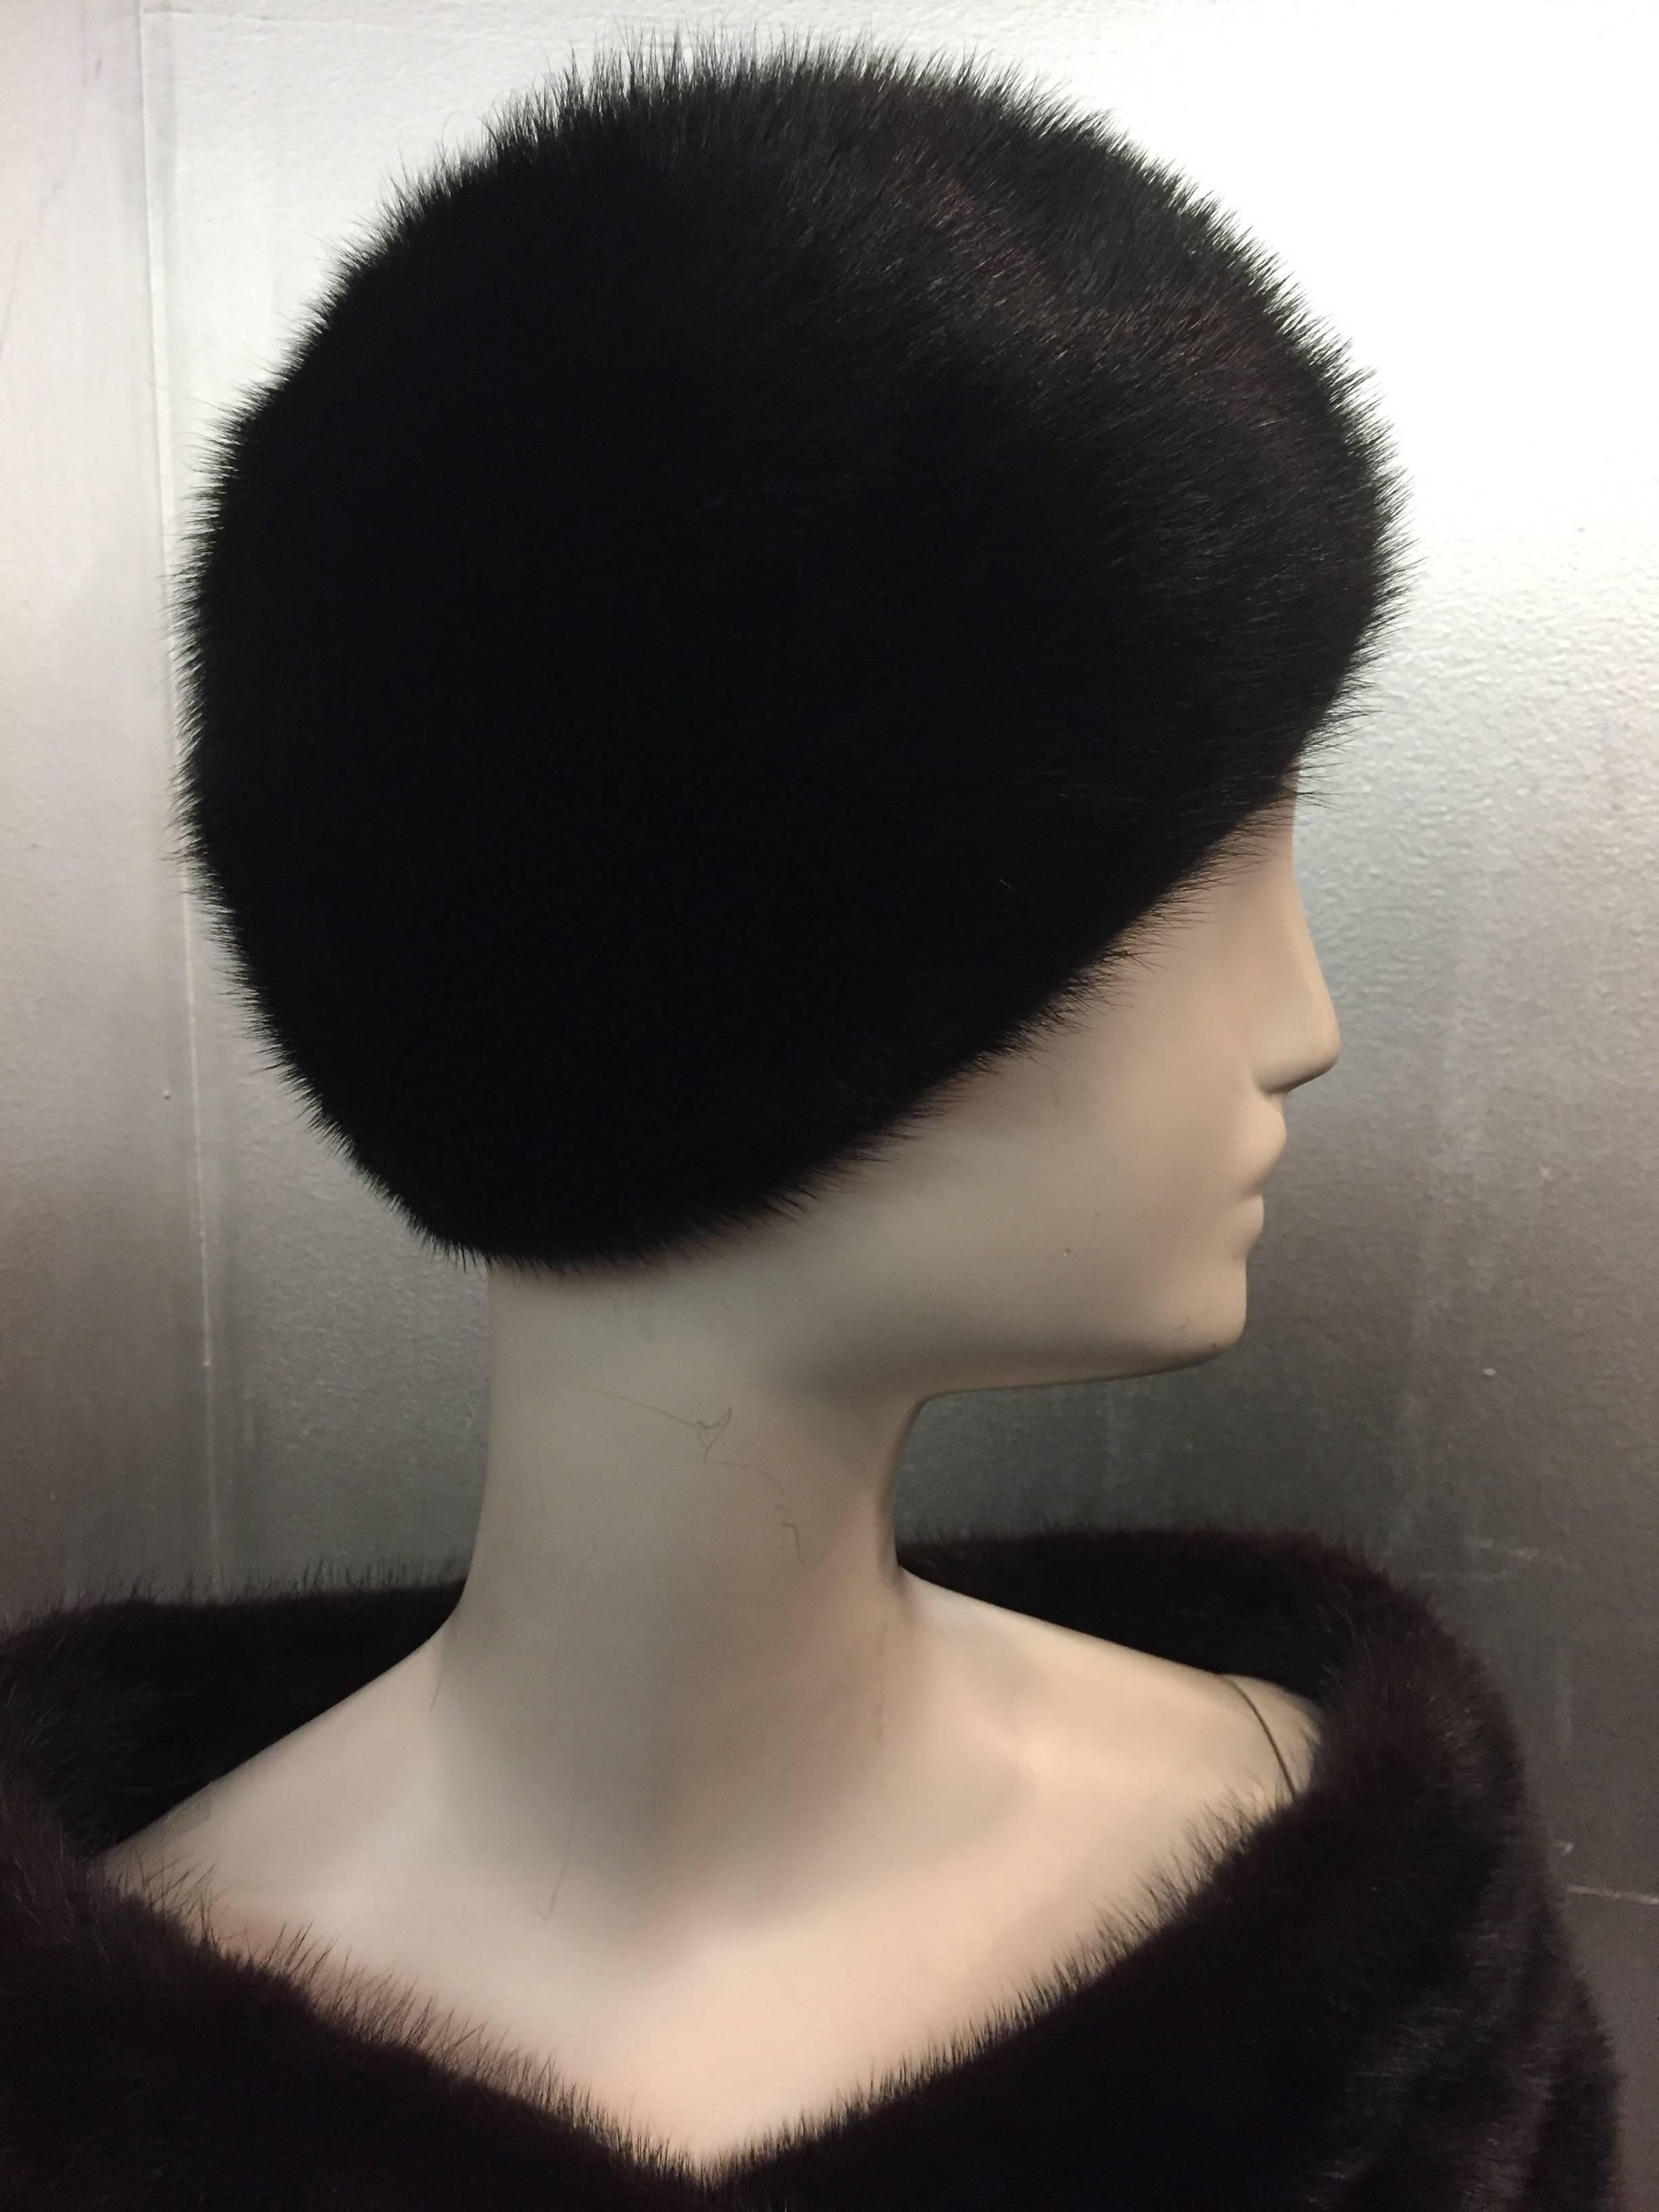 Women's 1960s Saks Black Mink Cropped Portrait Collar Evening Jacket and Matching Hat